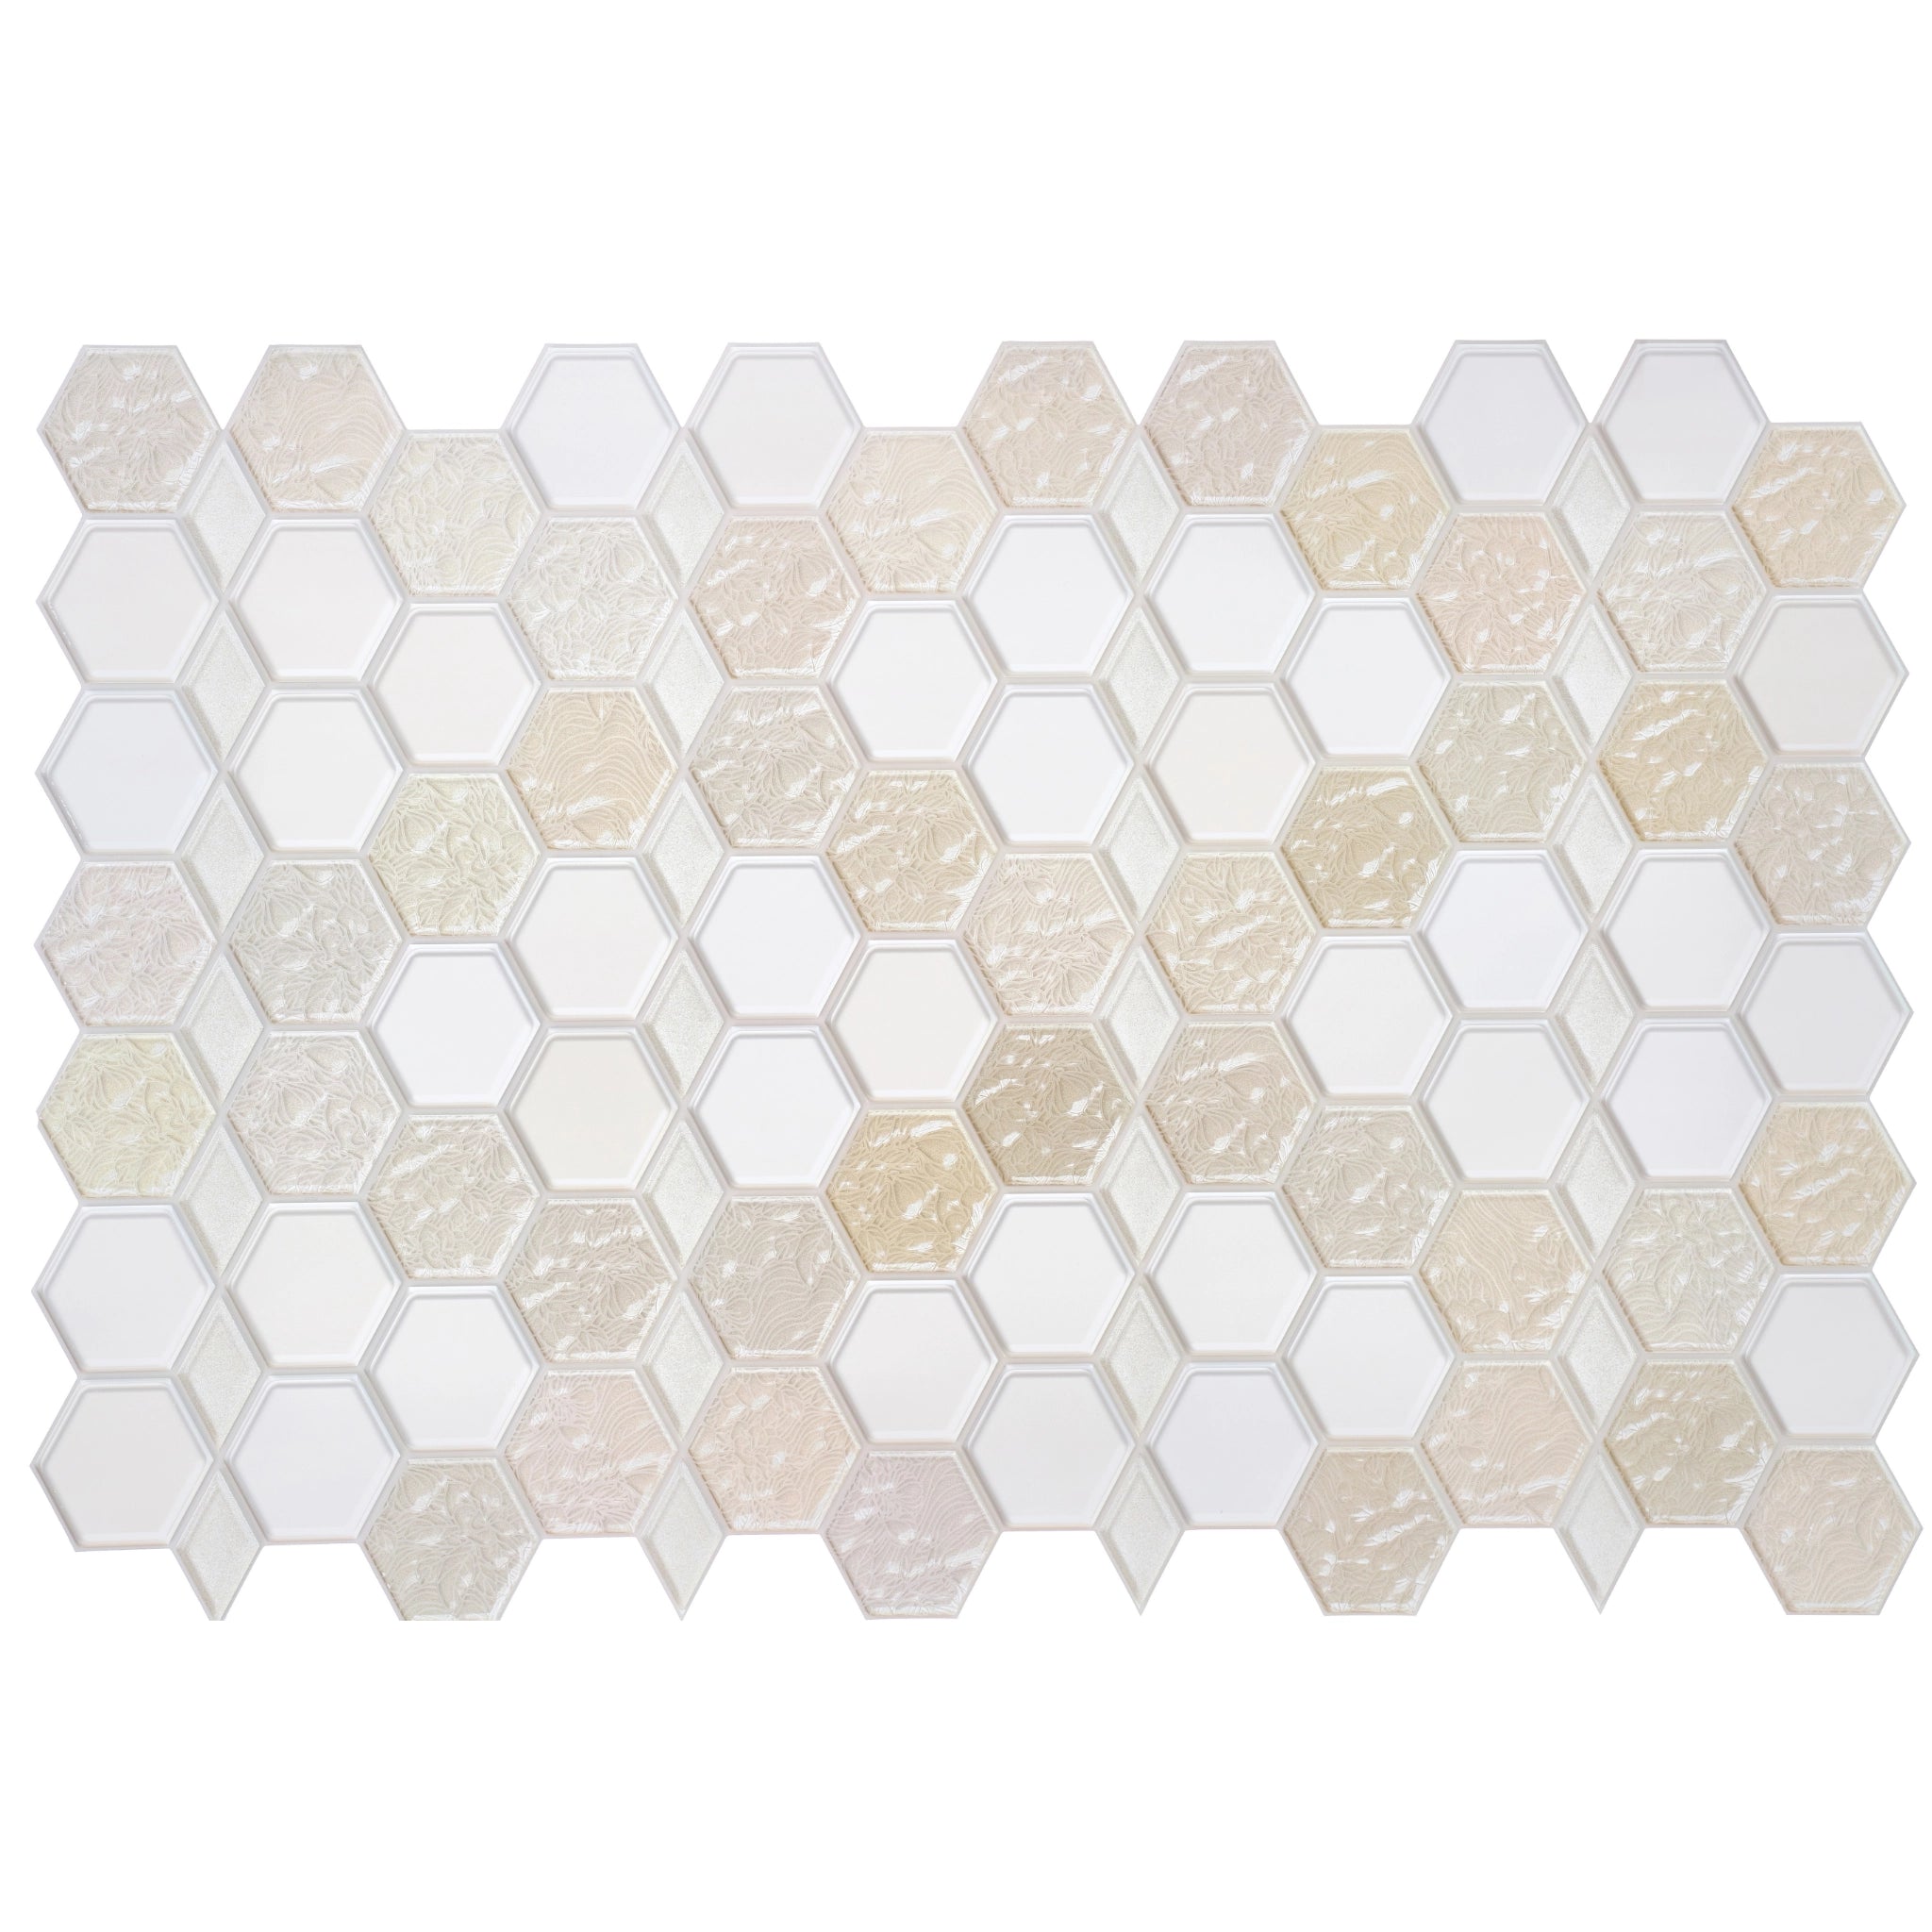 White & beige wall panel with geometric patterns, close-up view